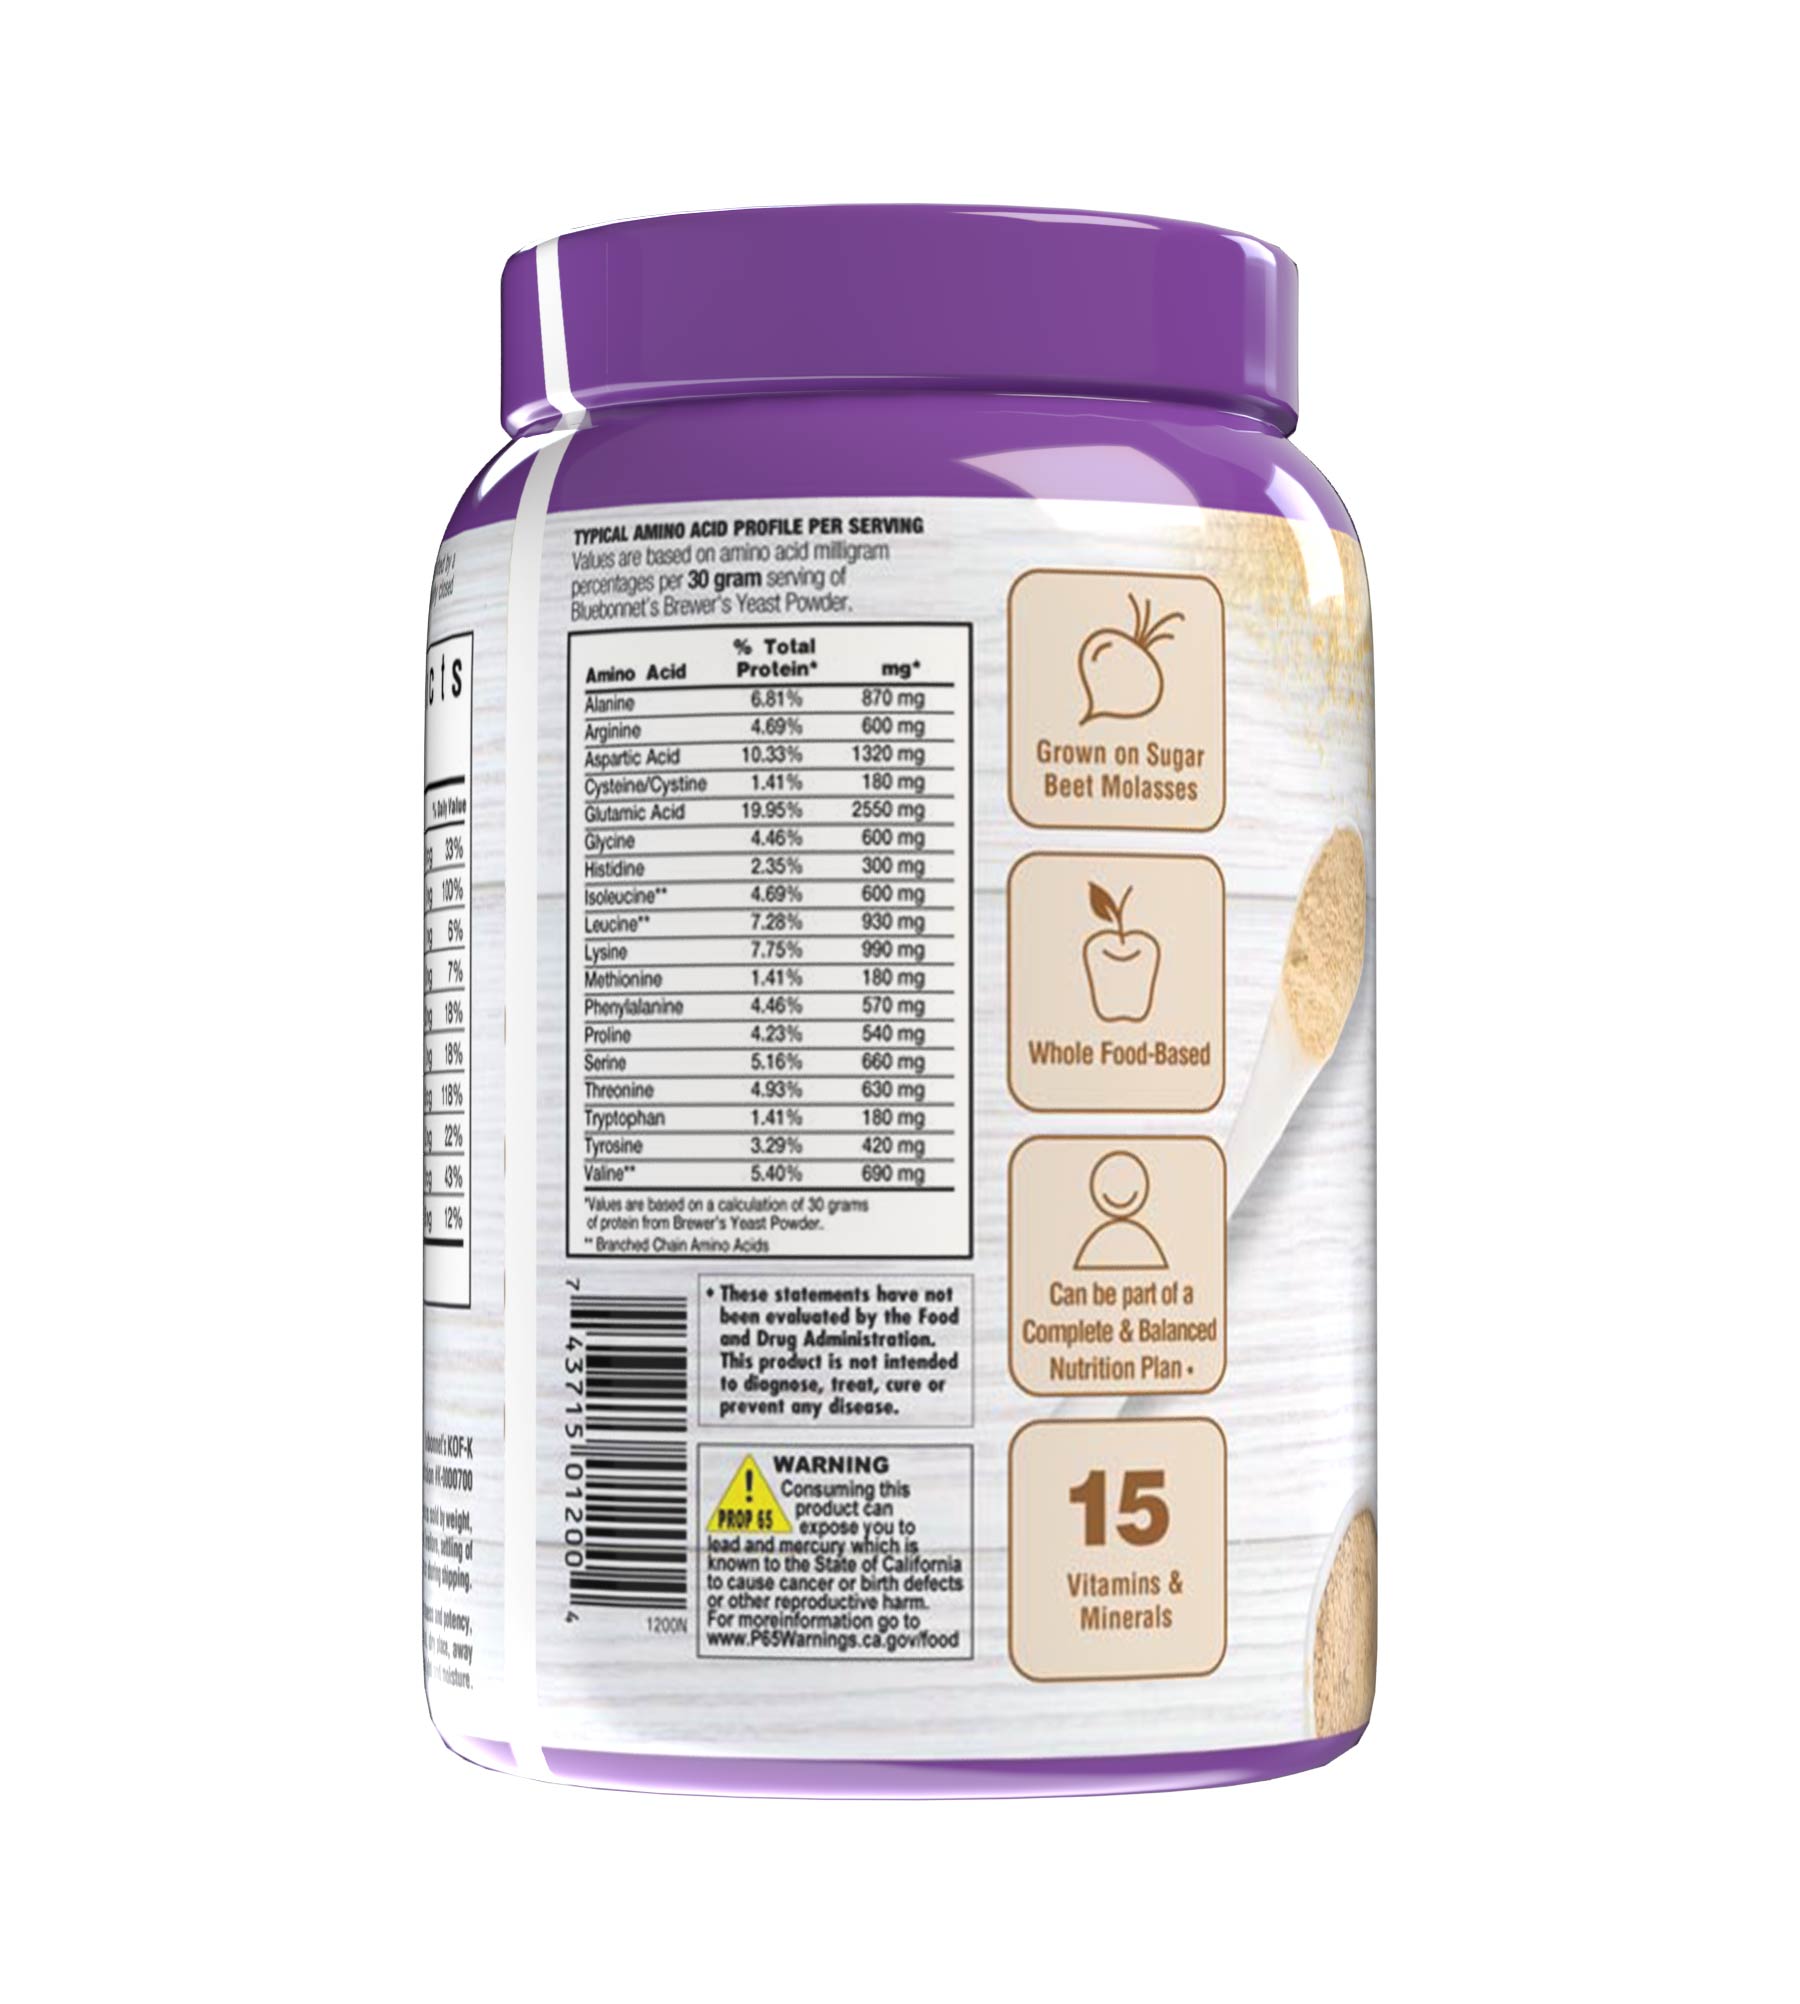 Bluebonnet’s Super Earth® Brewer’s Yeast Powder is formulated with a select strain of Saccharomyces cerevisiae that is carefully grown on certified non-GMO sugar beet molasses instead of the typical grain-derived brewer’s yeast that is recovered from the beer-brewing process. Description panel. #size_1 lb